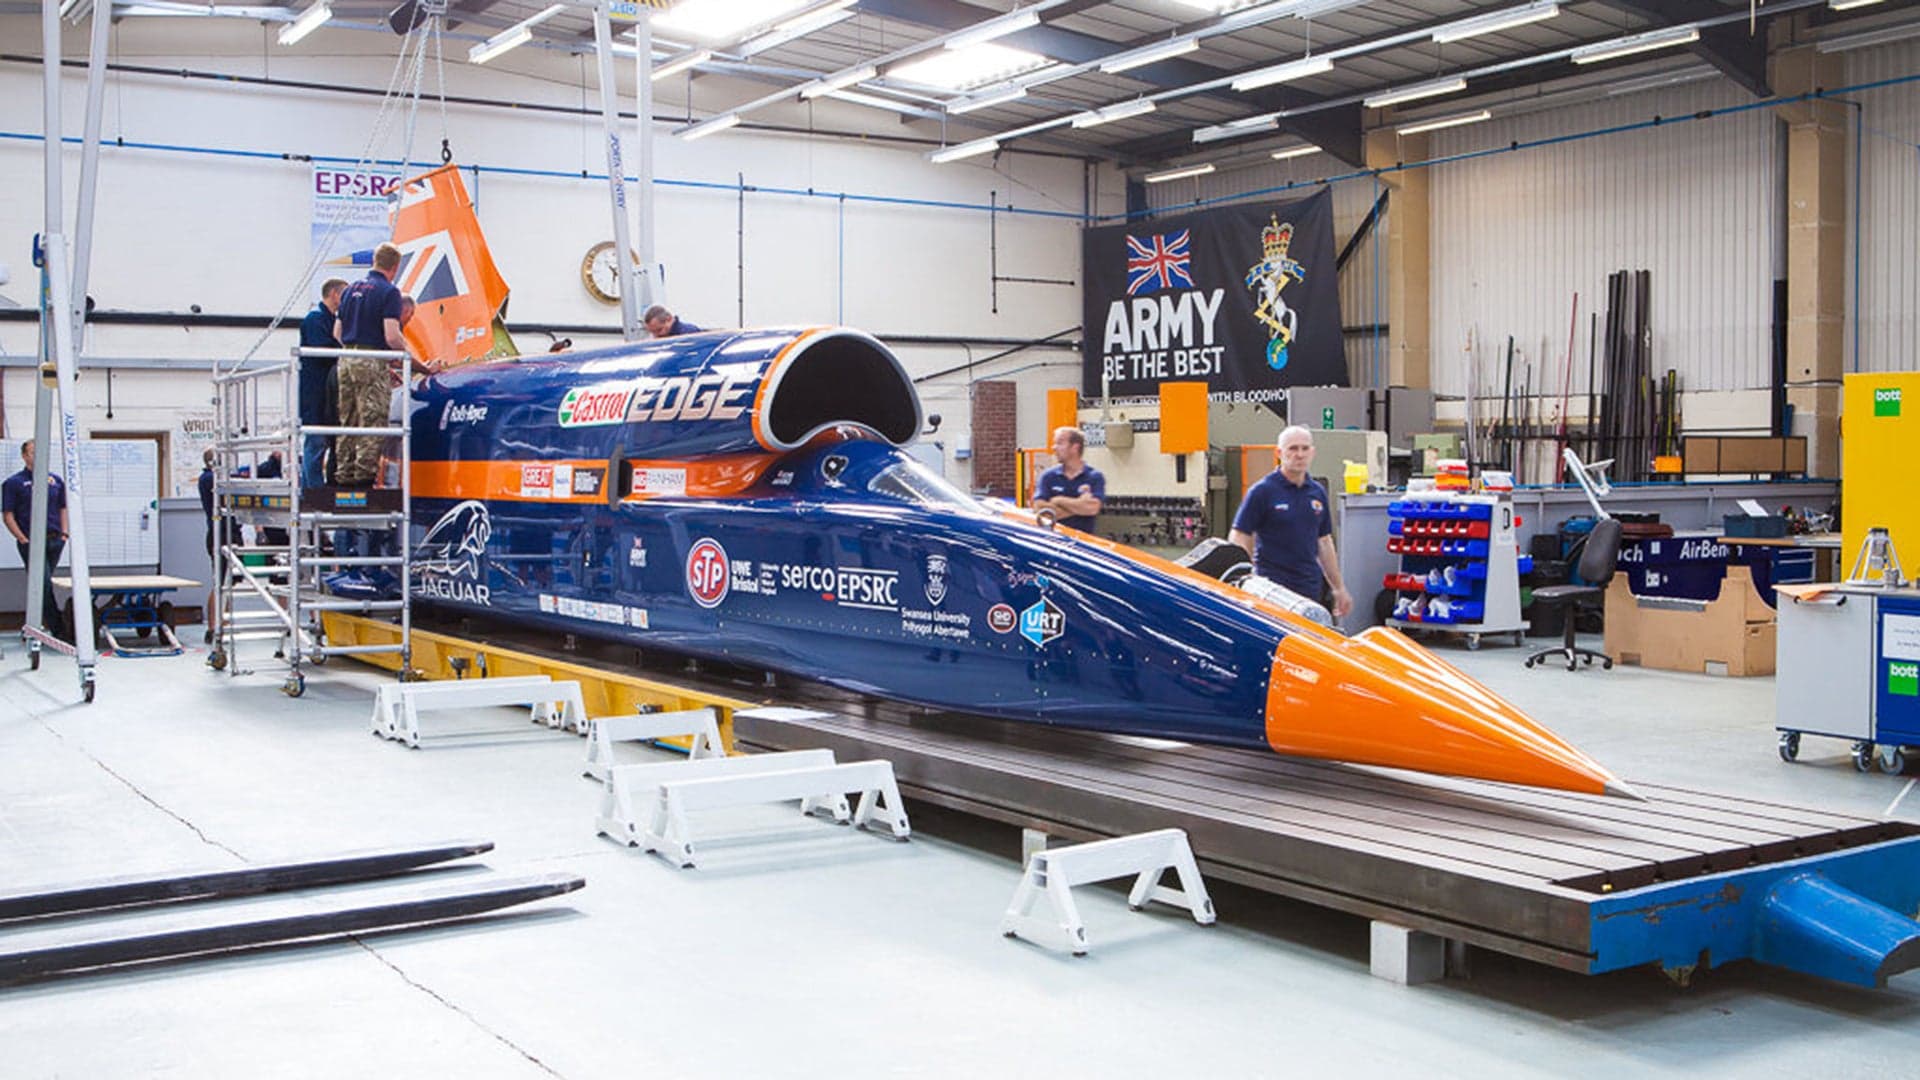 Multi-Million Dollar Bloodhound SSC Land Speed Record Project Runs Out of Cash